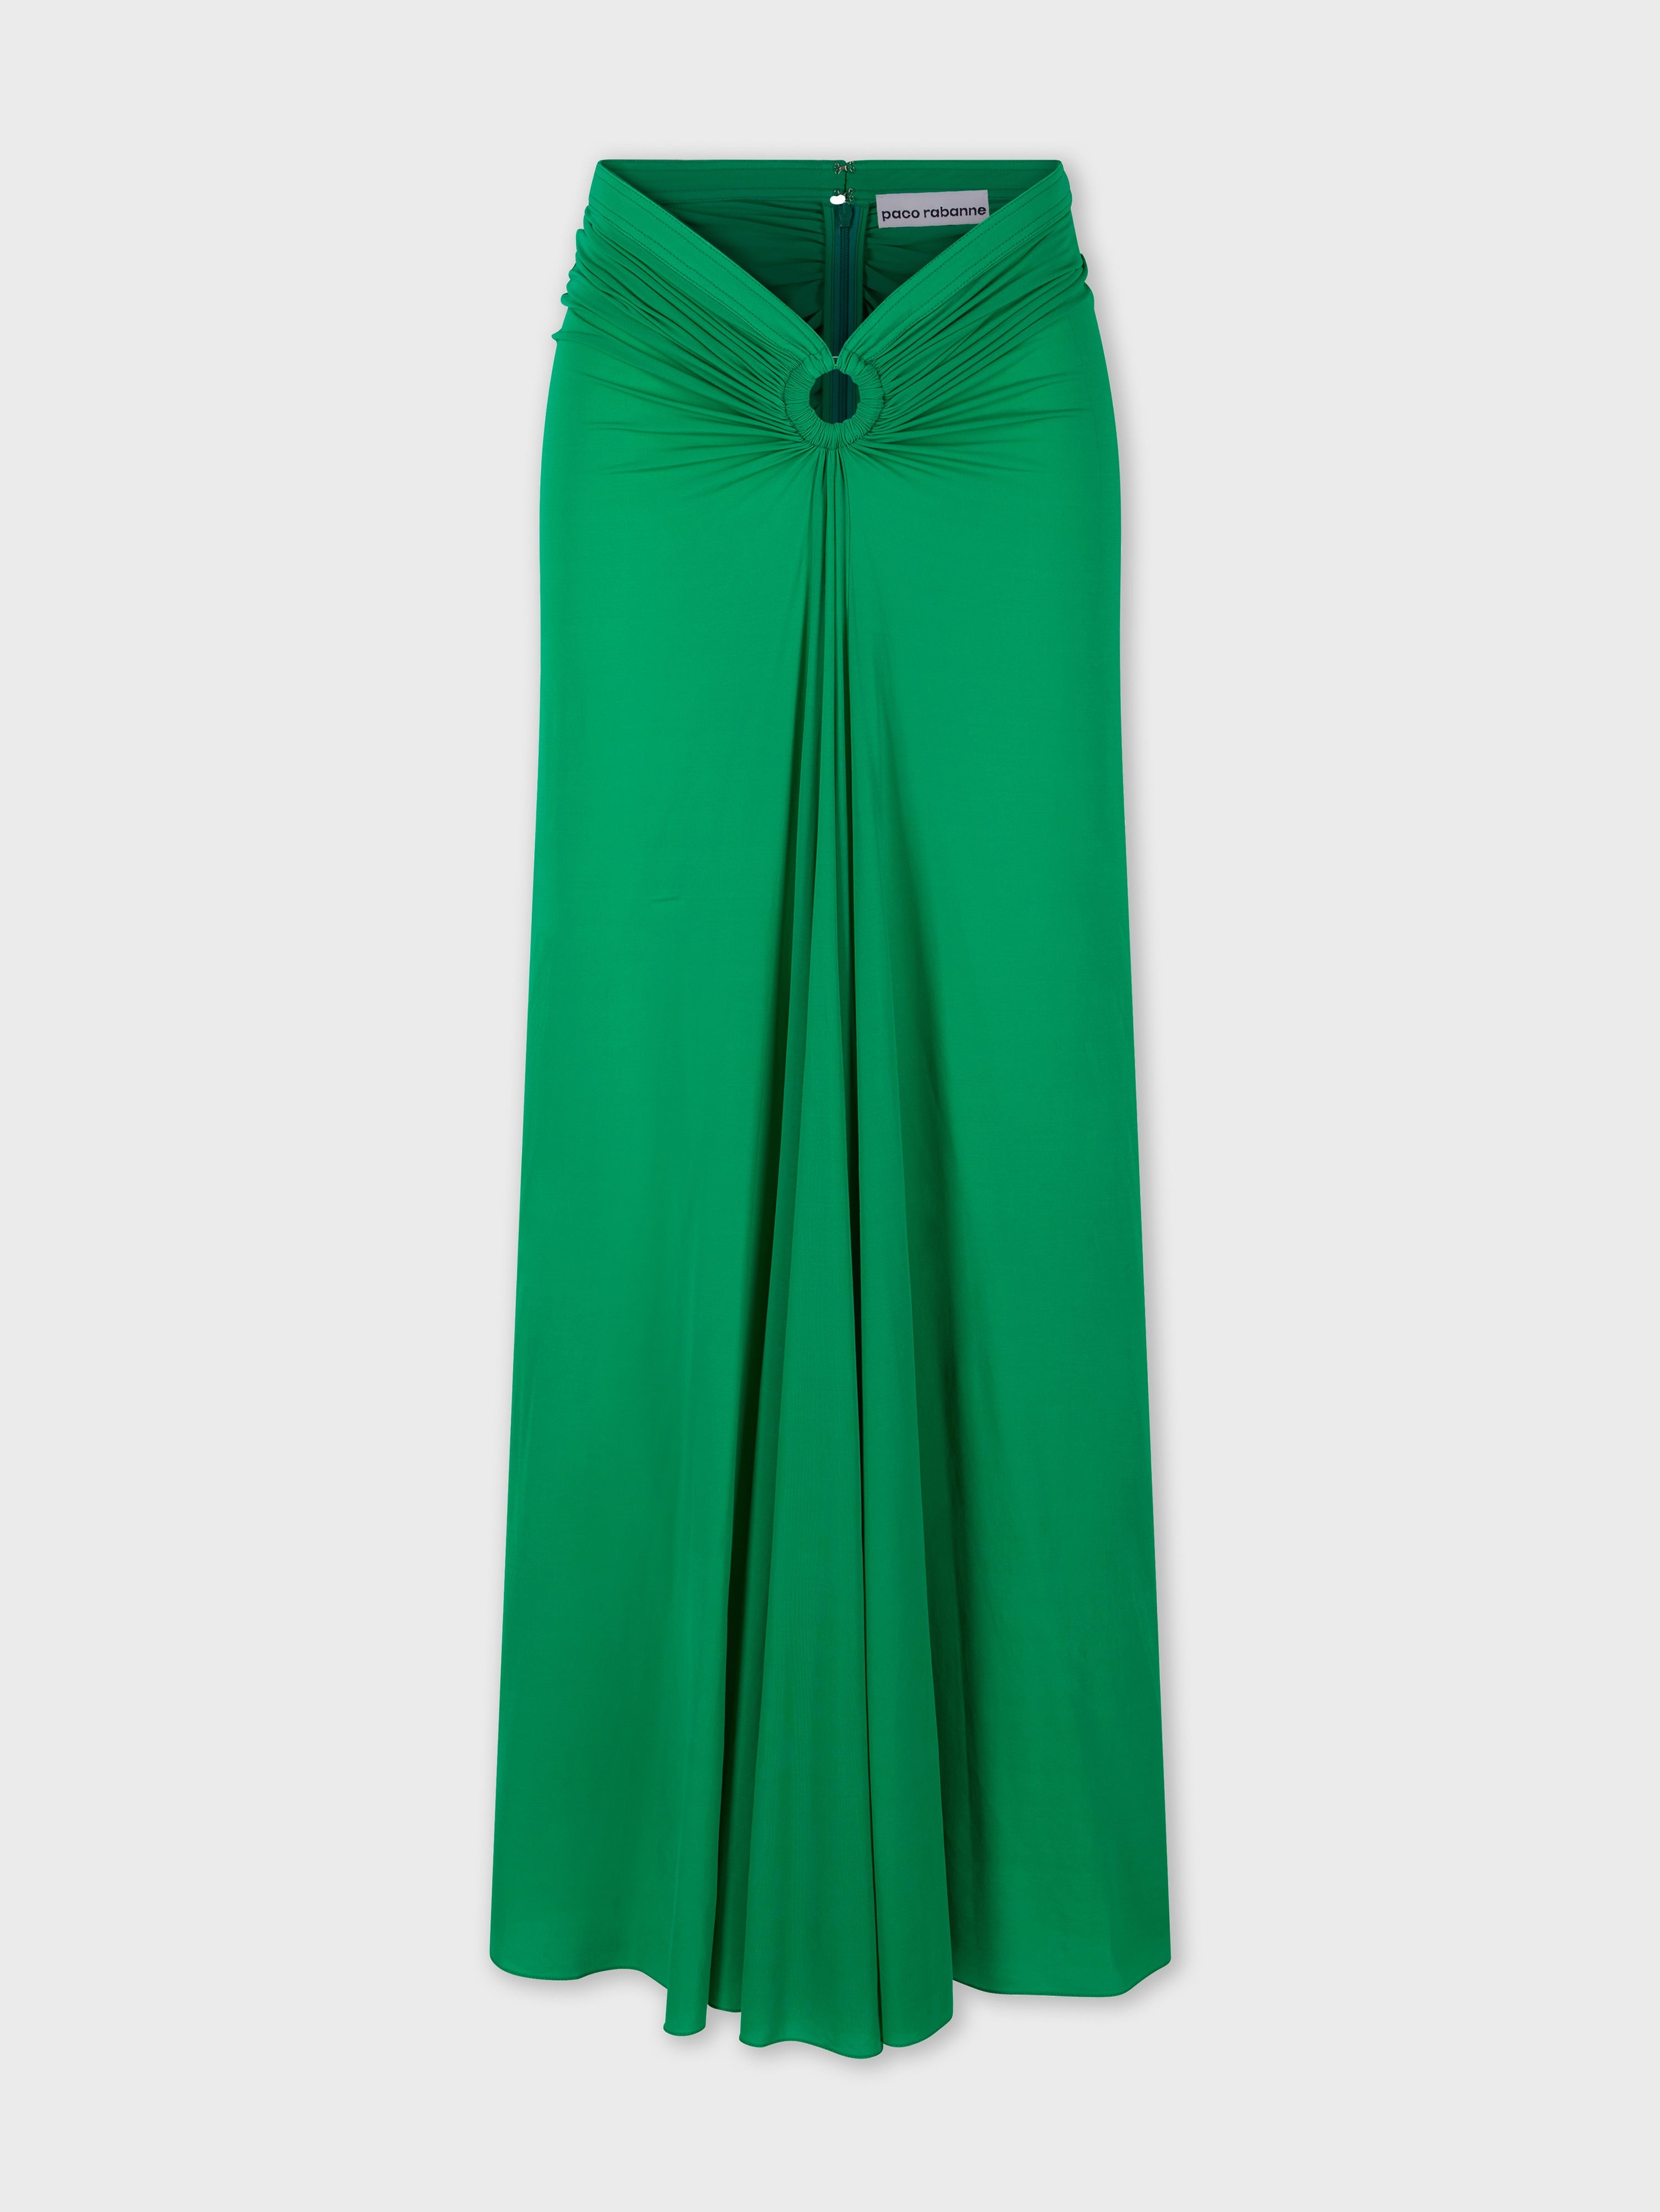 GREEN FLARED DRAPED SKIRT IN JERSEY - 1